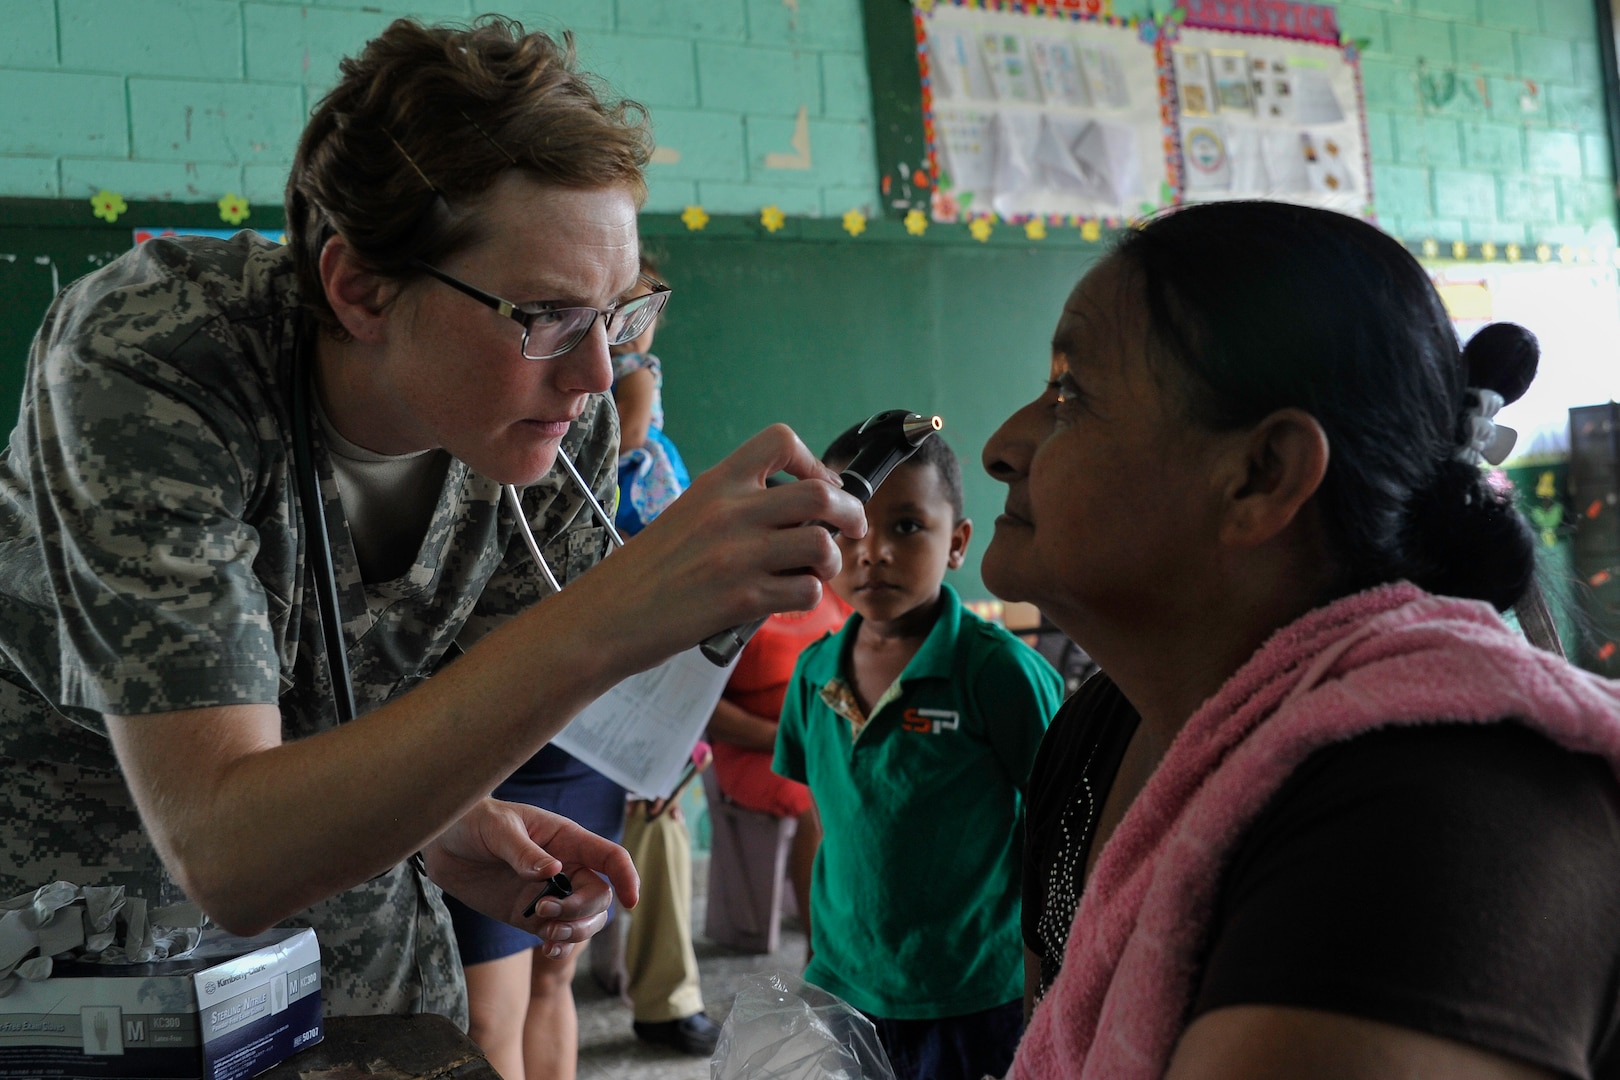 U.S. Army Capt. Angela Hunter, Joint Task Force-Bravo Medical Element physician assistant, inspects the eyes of an elderly woman during a Medical Readiness Training Exercise operation in Trujillo, Honduras, July 29, 2016. During the MEDRETE, MEDEL treated more than 1,000 host nation personnel over two days. (U.S. Air Force photo by Staff Sgt. Siuta B. Ika)